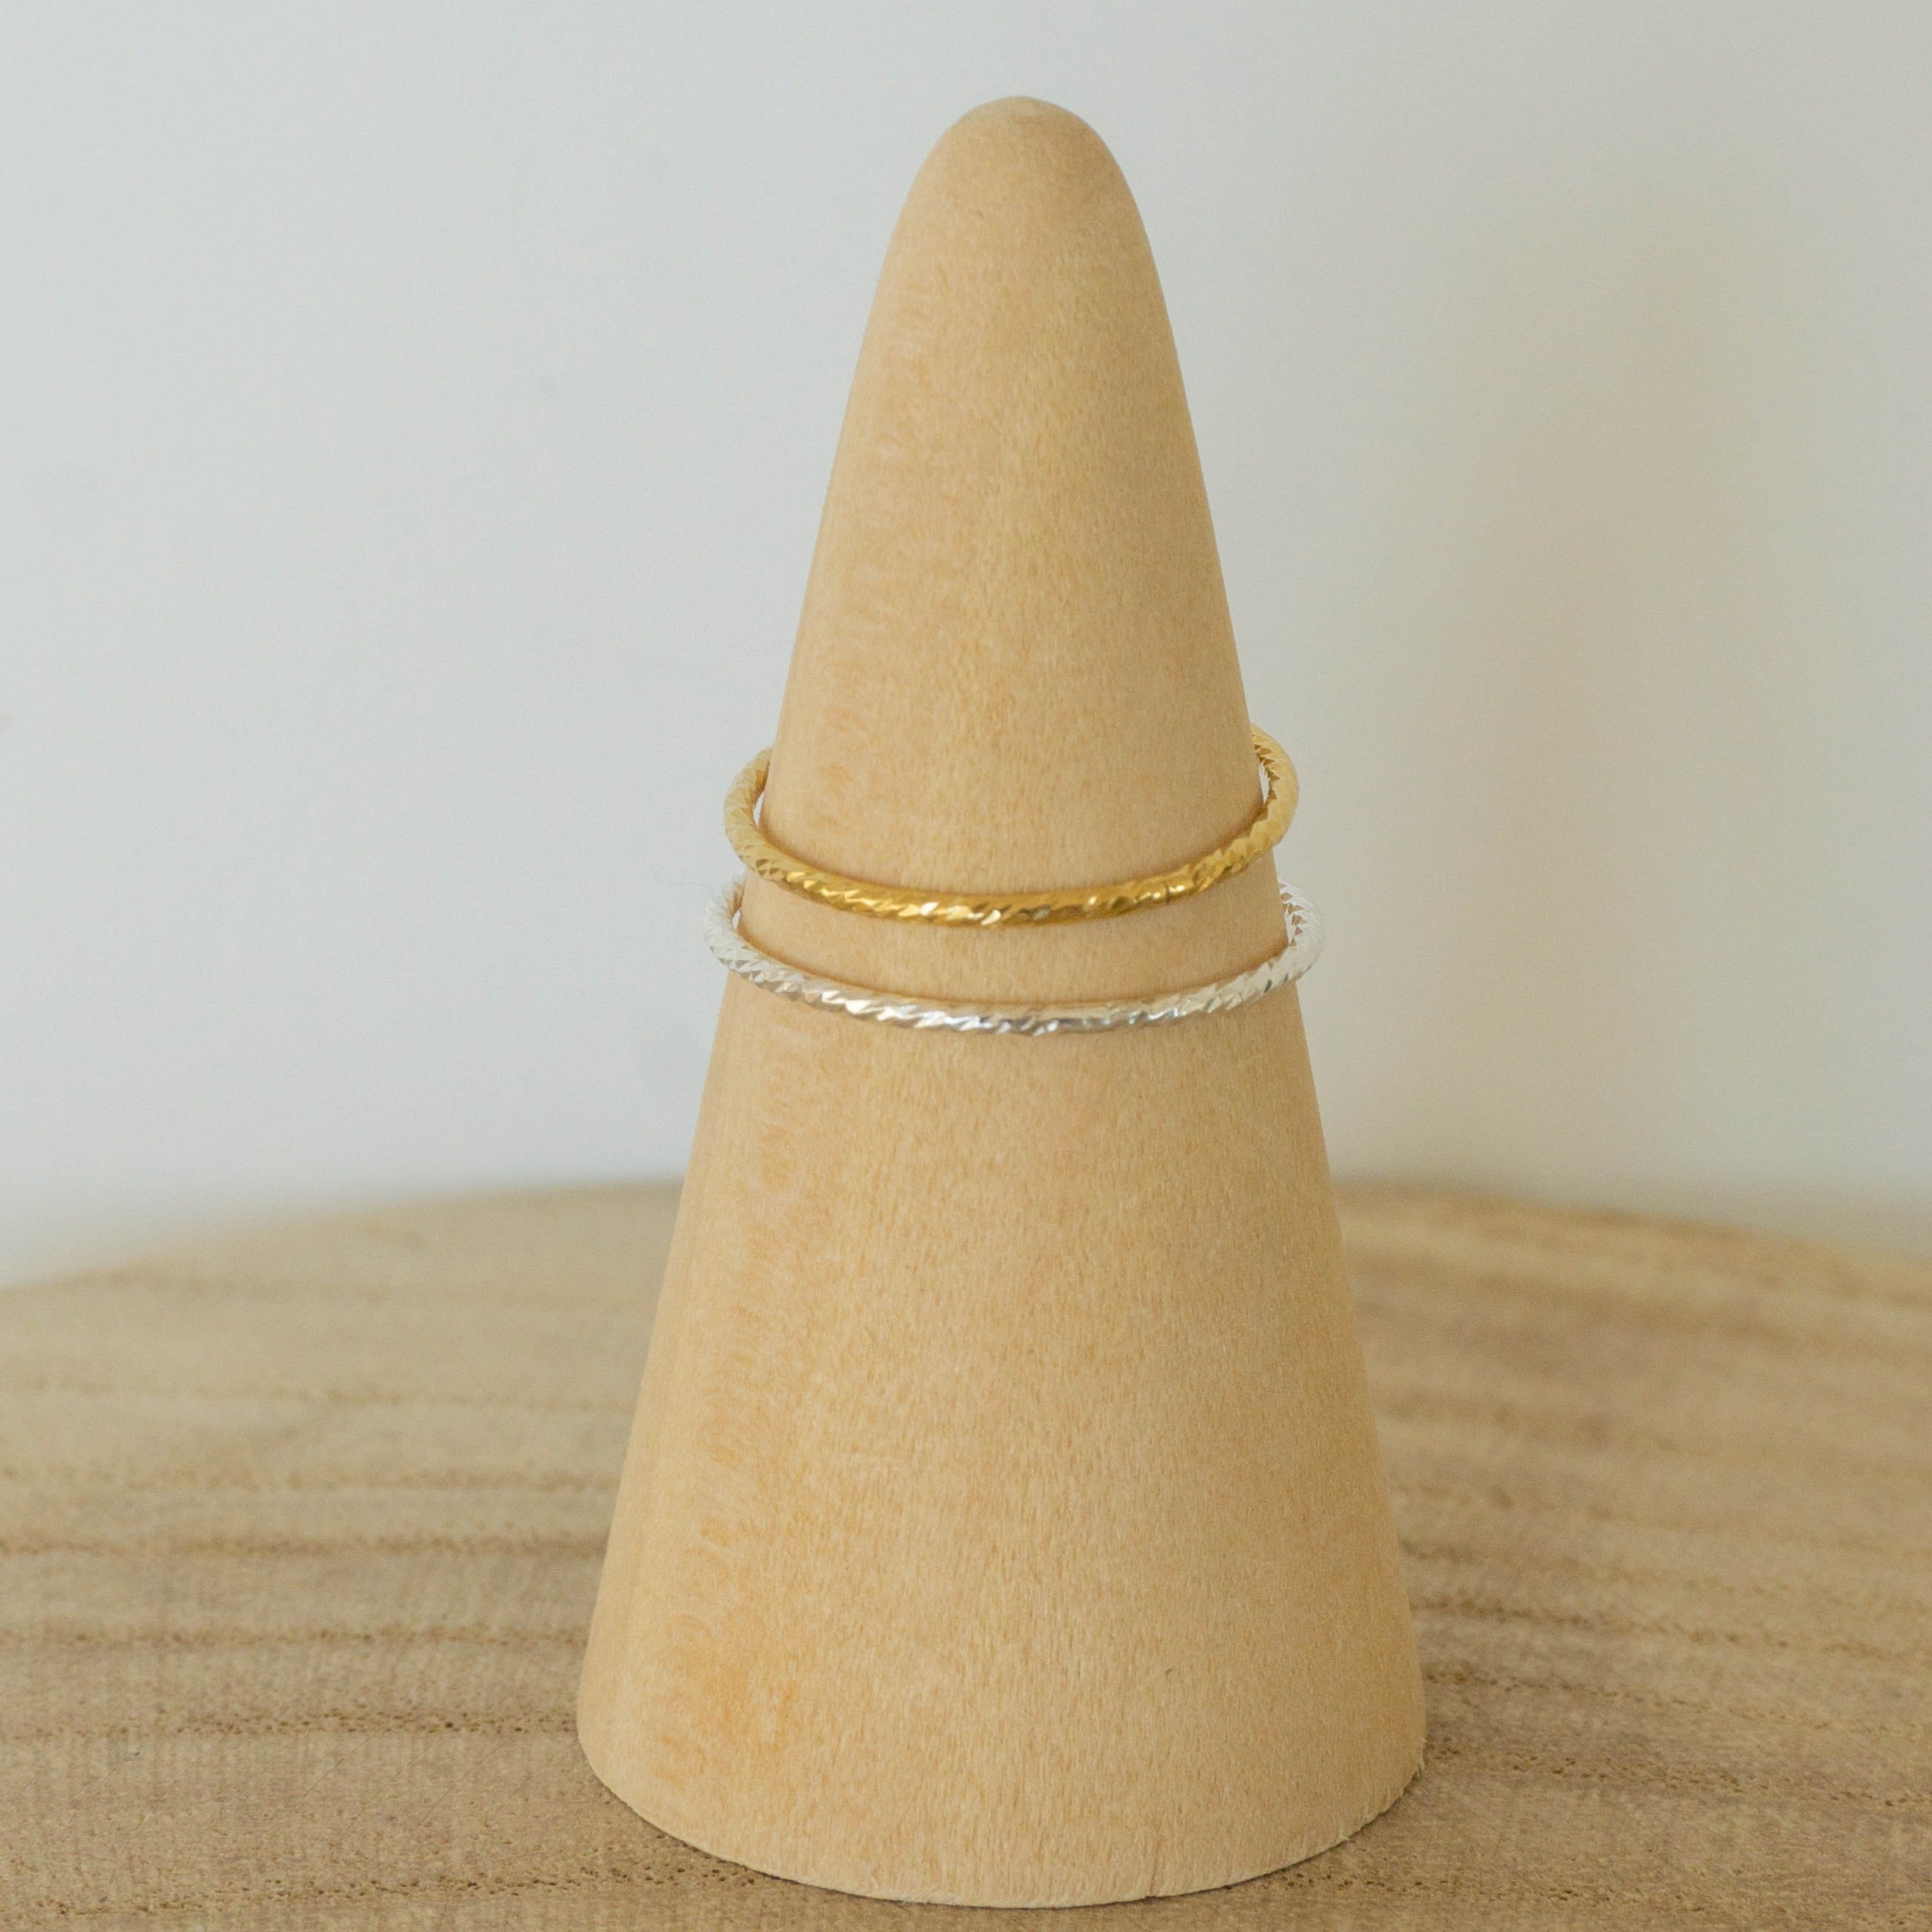 sparkle stacking ring gold filled / sparkle stacking ring gold filled